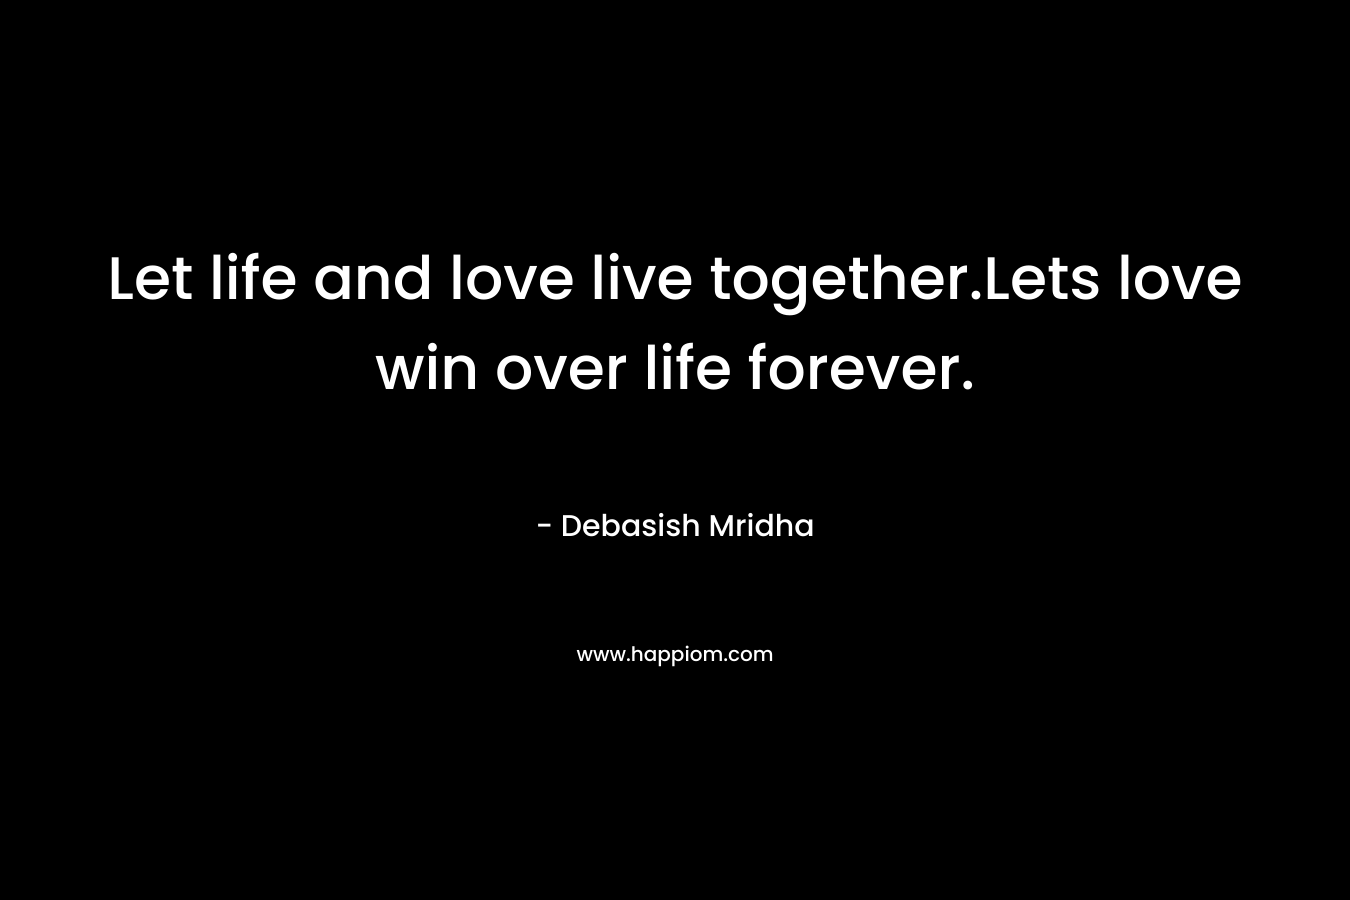 Let life and love live together.Lets love win over life forever.